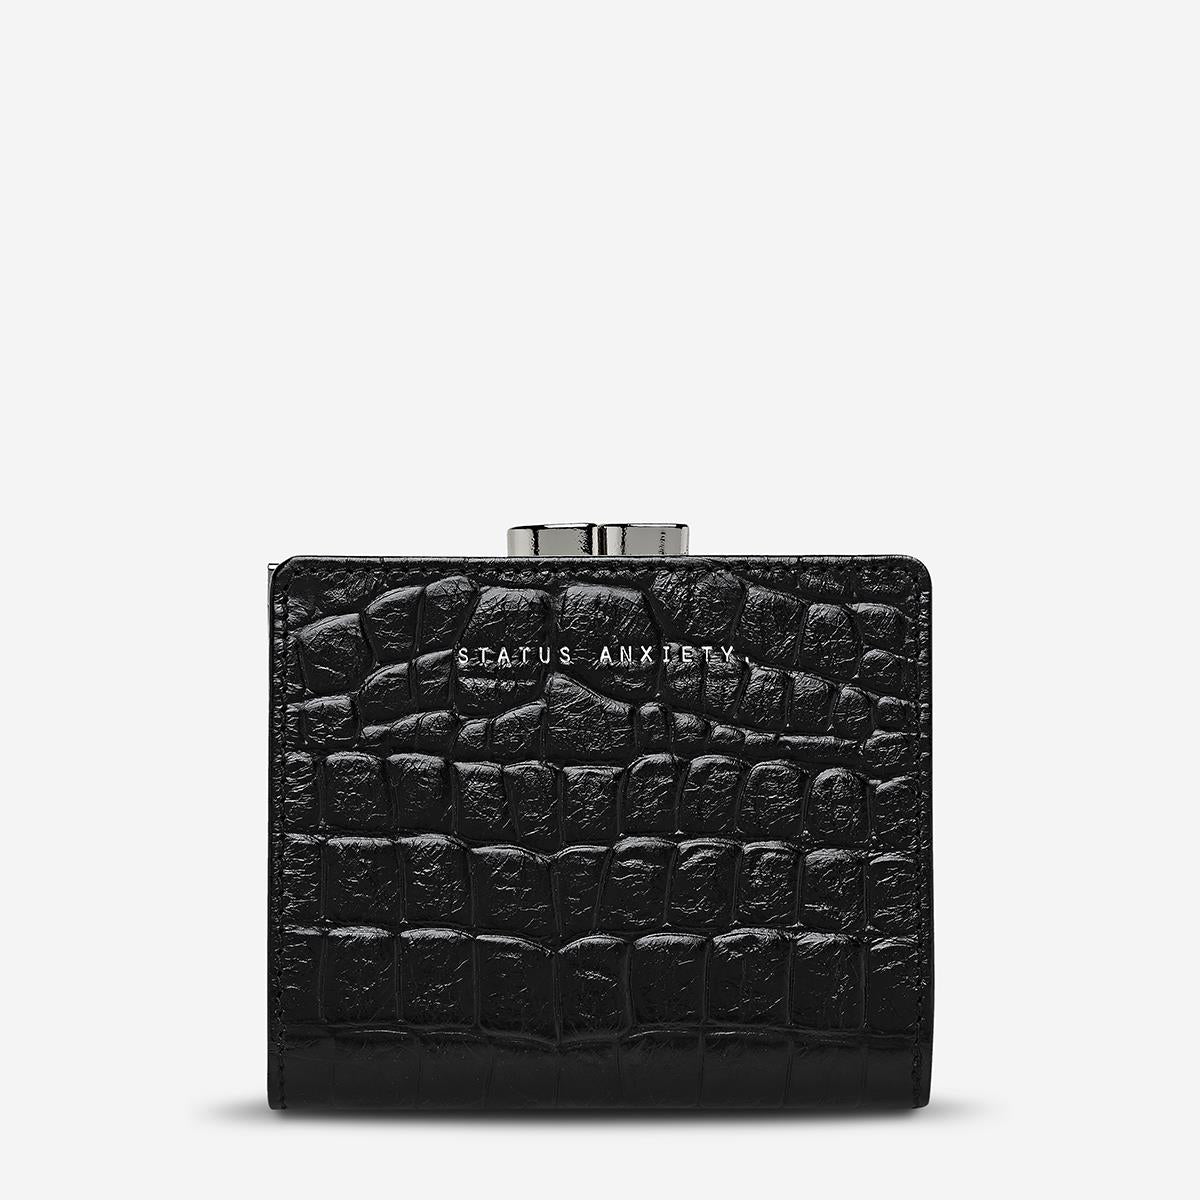 STATUS ANXIETY - AS YOU WERE - BLACK CROC EMBOSS